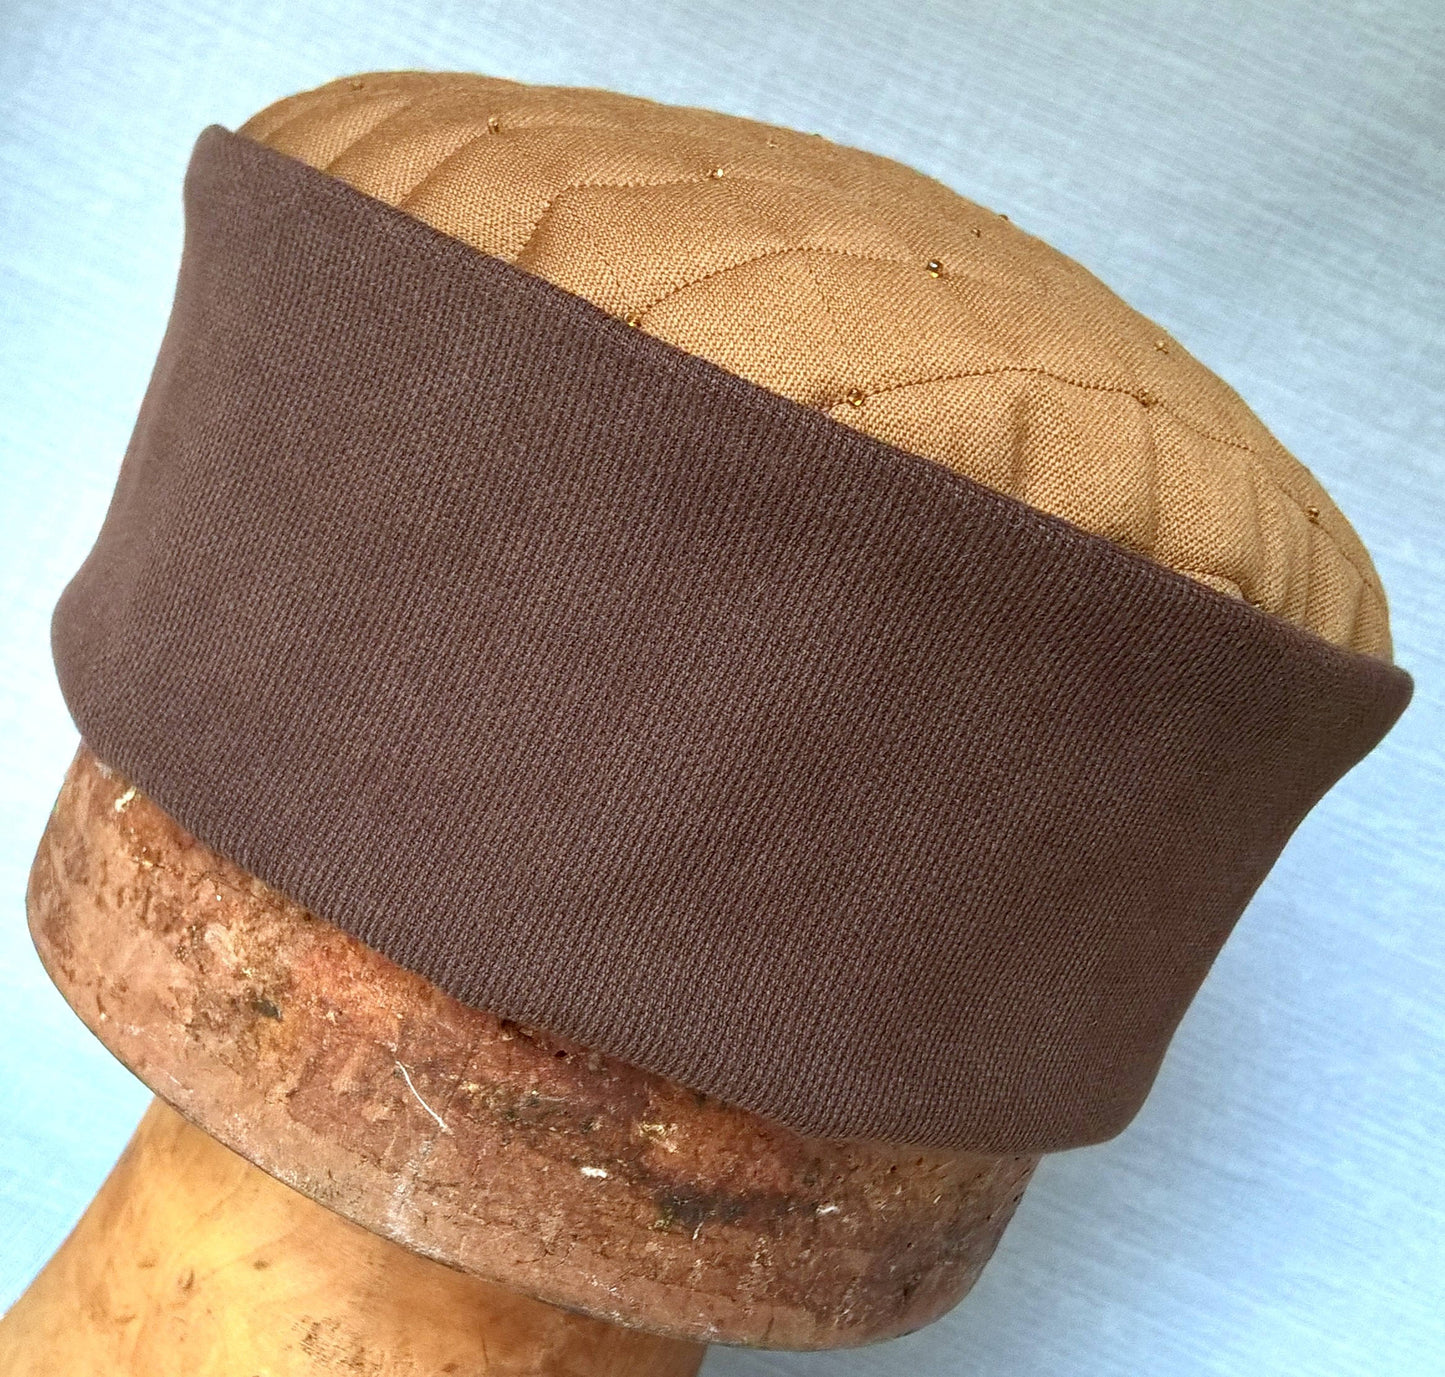 The smoking cap has a camel coloured tip and a dark brown crown